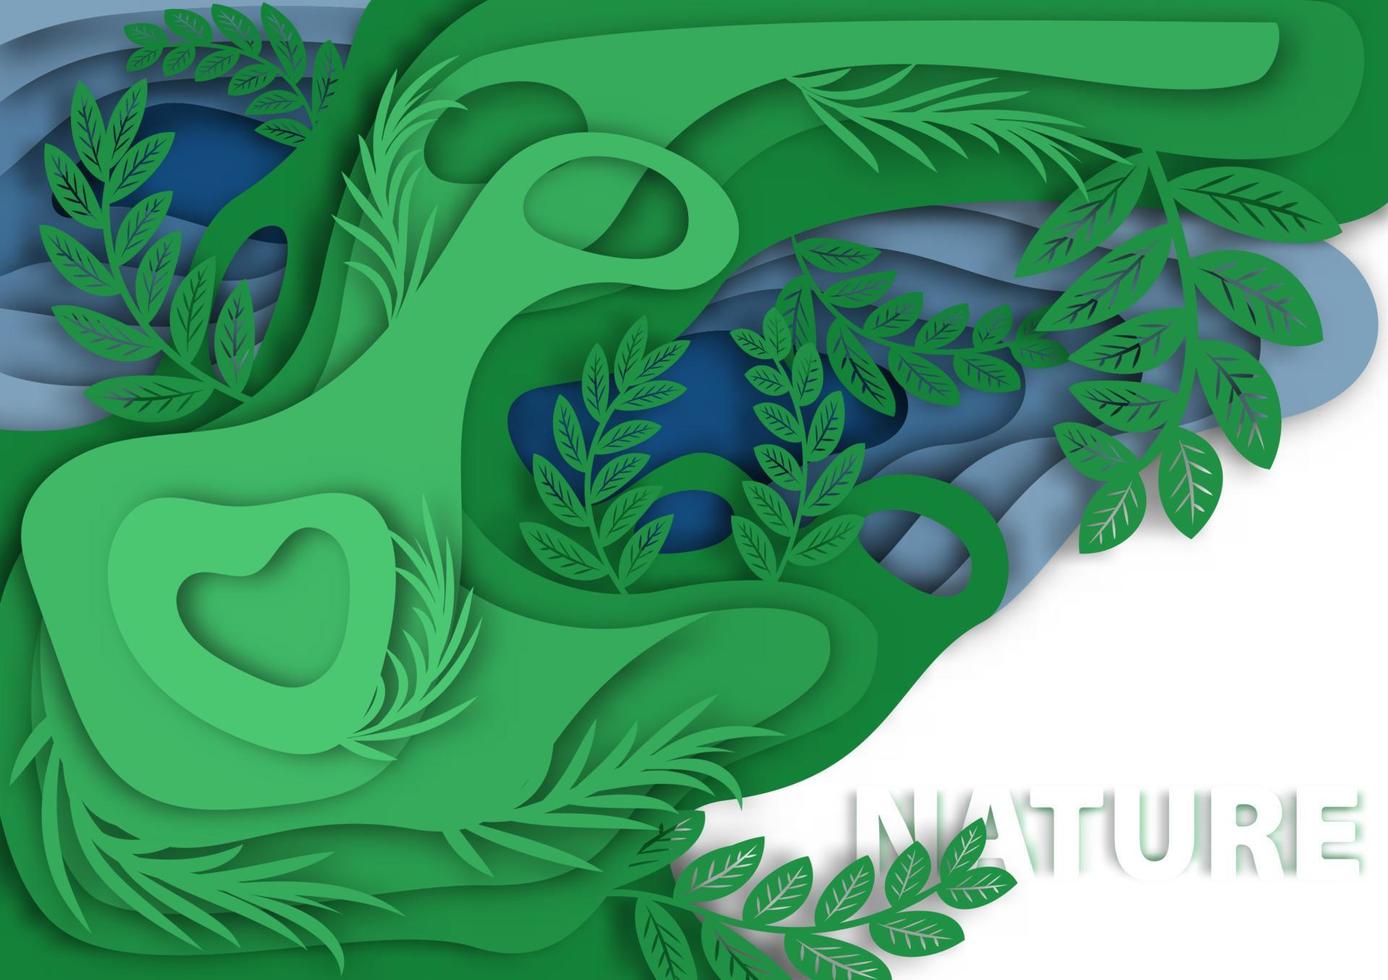 Top view of nature paper cut. Leaves, bushes, river. Vector illustration.